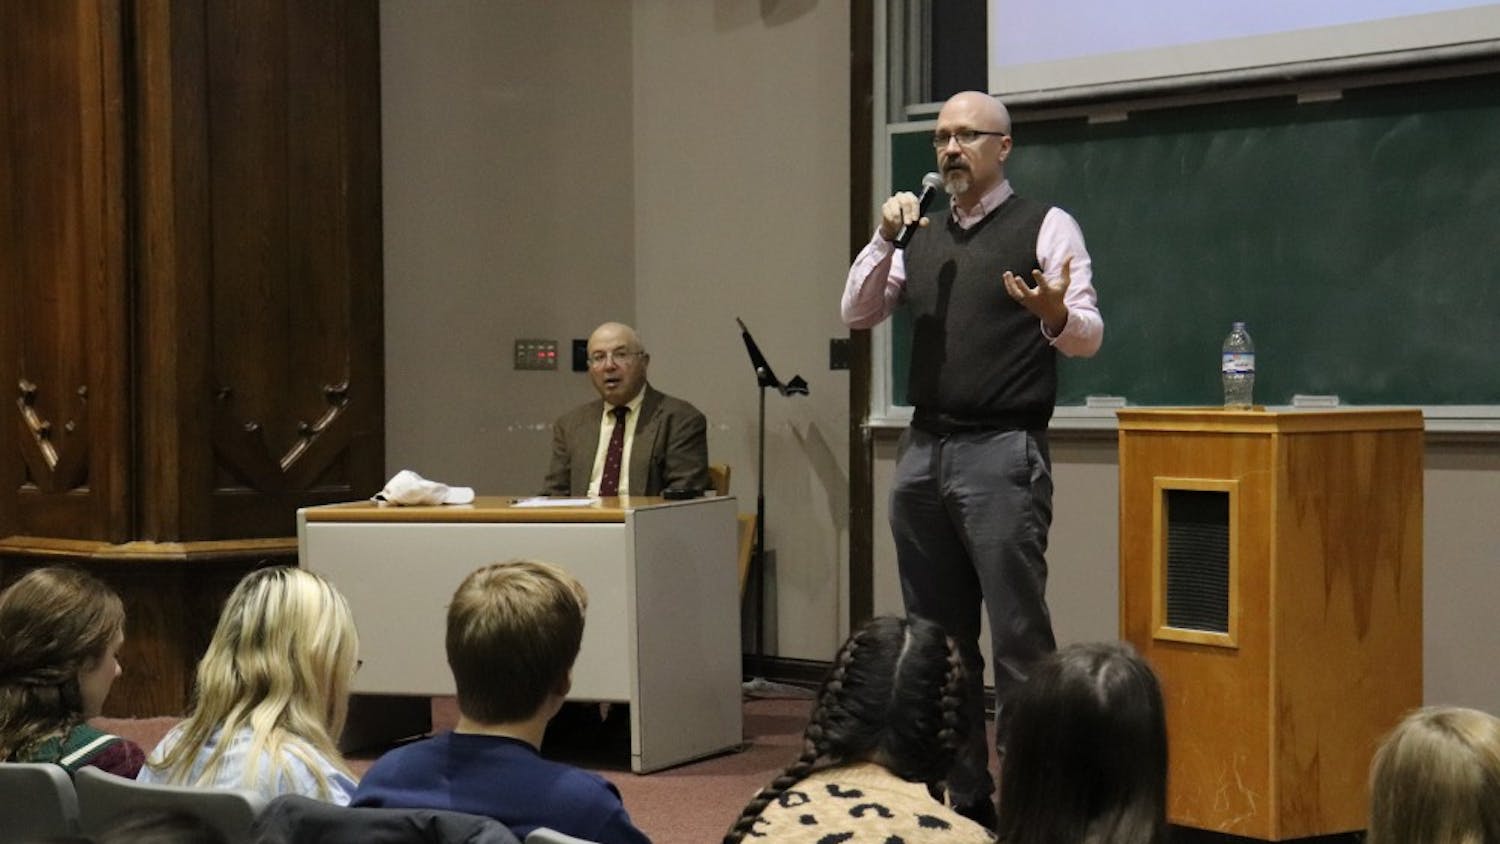 Dan Canon, a 9th District congressional Democratic candidate, introduces himself and his platform's beliefs to IU’s students. Canon discussed his ideas on health care for everyone and how to fight the opioid epidemic.&nbsp;